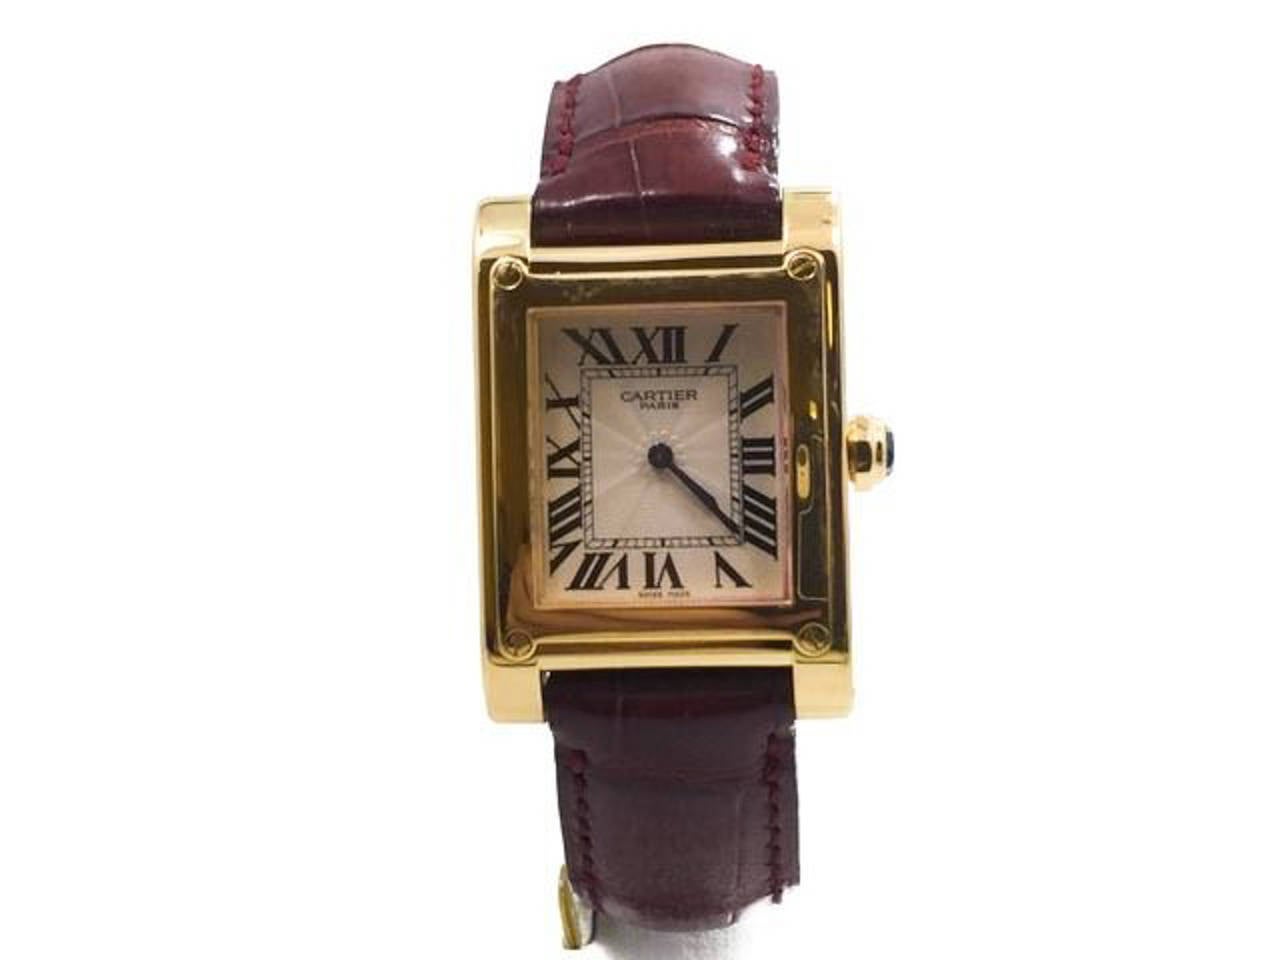 New Old Stock Mens Cartier Tank A Vis in 18k Yellow Gold On Strap W/ Deployment Buckle, Ref W1529451. Included with the Watch are its Inner & Outer Box, Manual & Blank Cert. Movement is operated by Manual Wind.